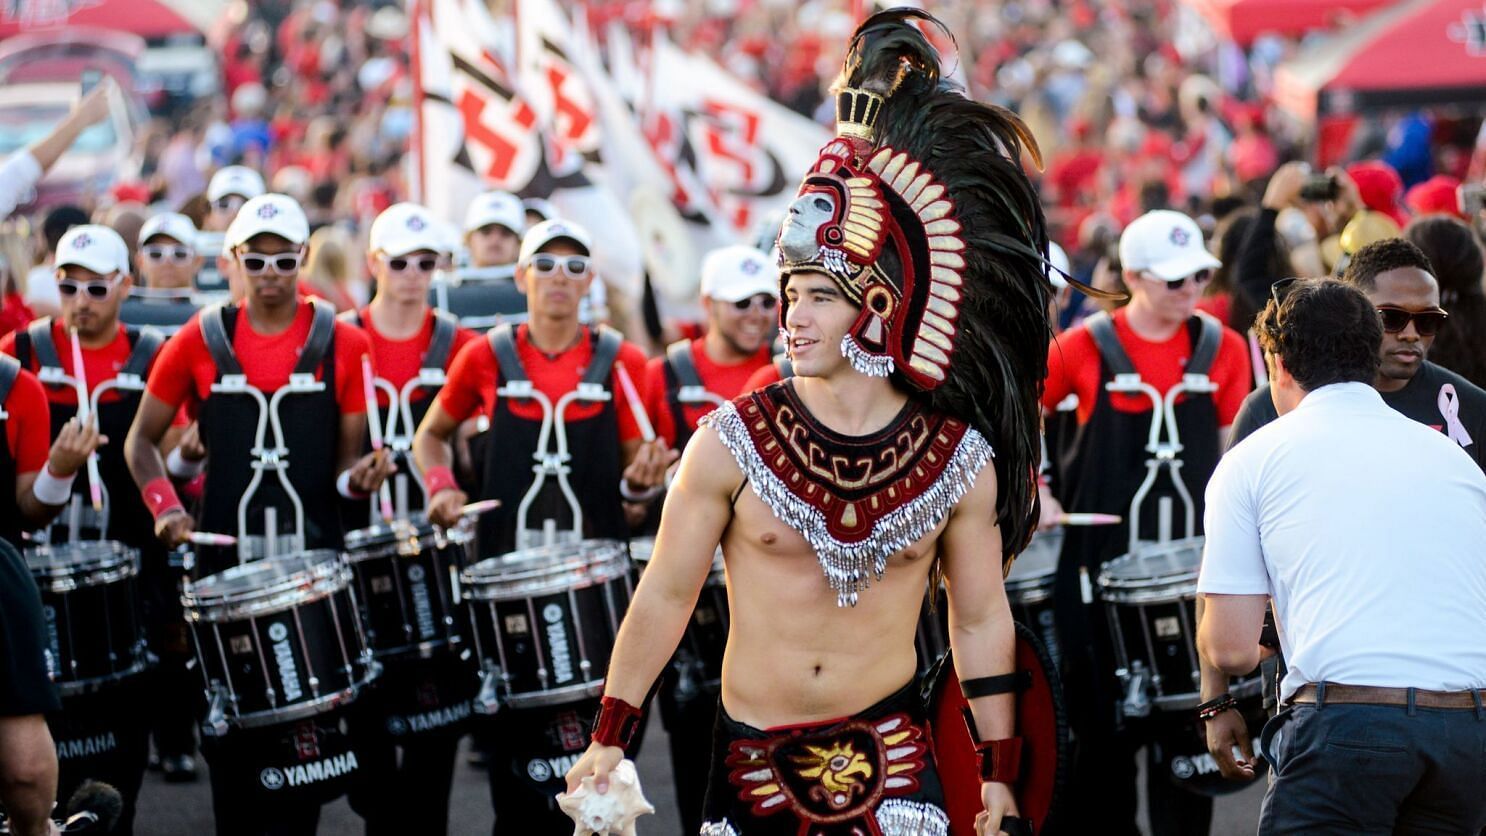 The Aztecs contine to be mentioned in connection to the Big 12